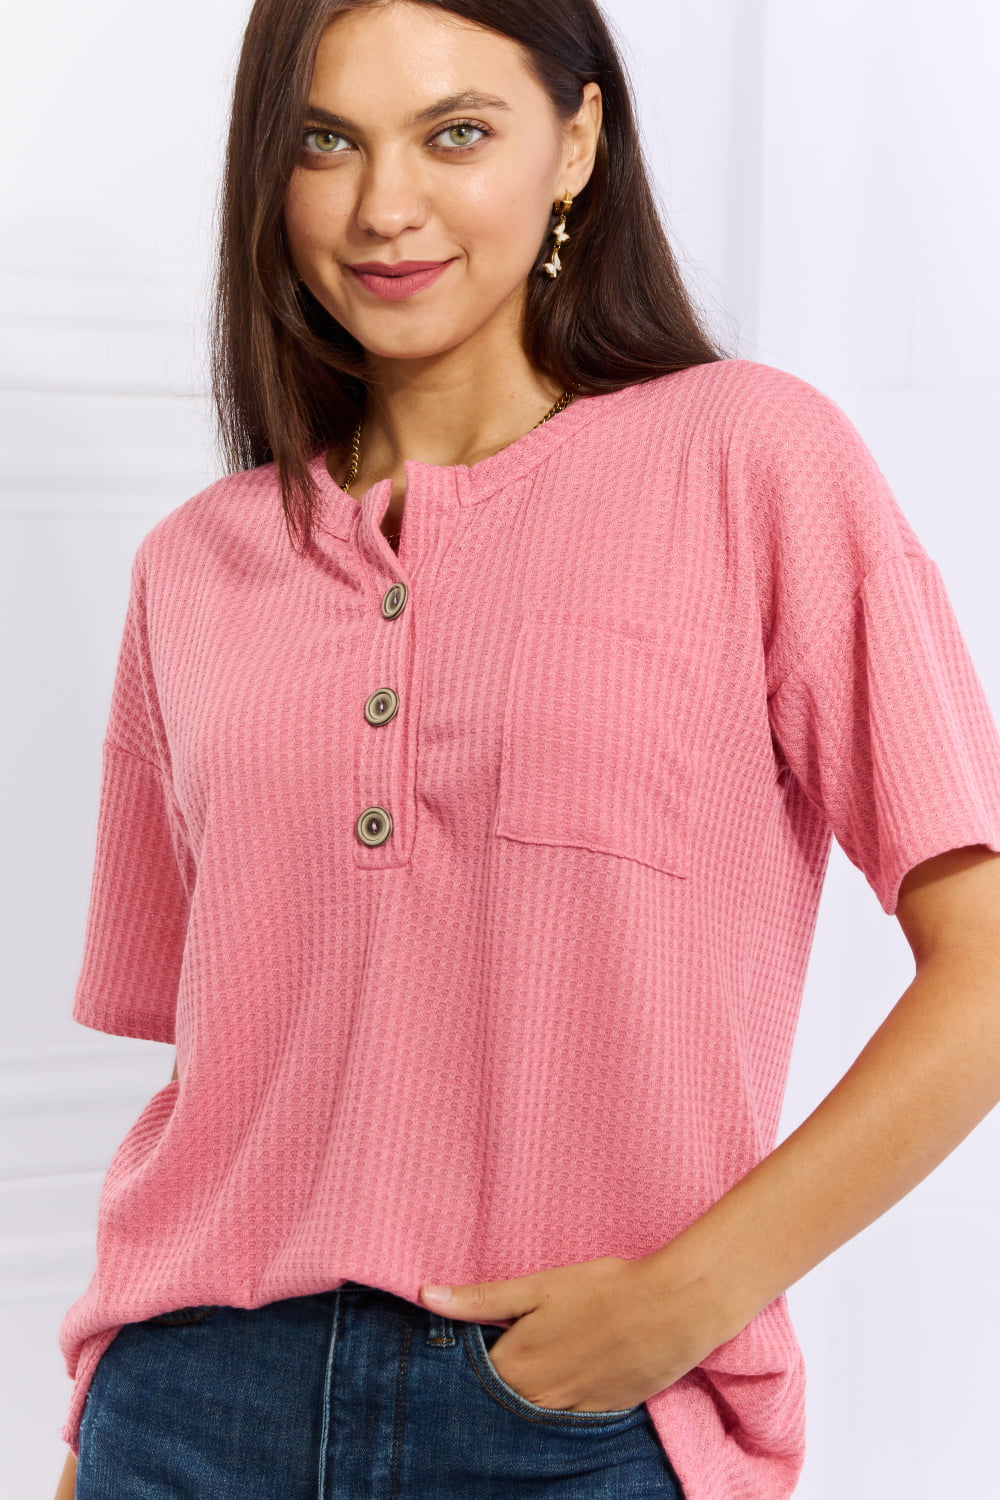 Heimish Made For You Full Size 1/4 Button Down Waffle Top in Coral - AnnRose Boutique